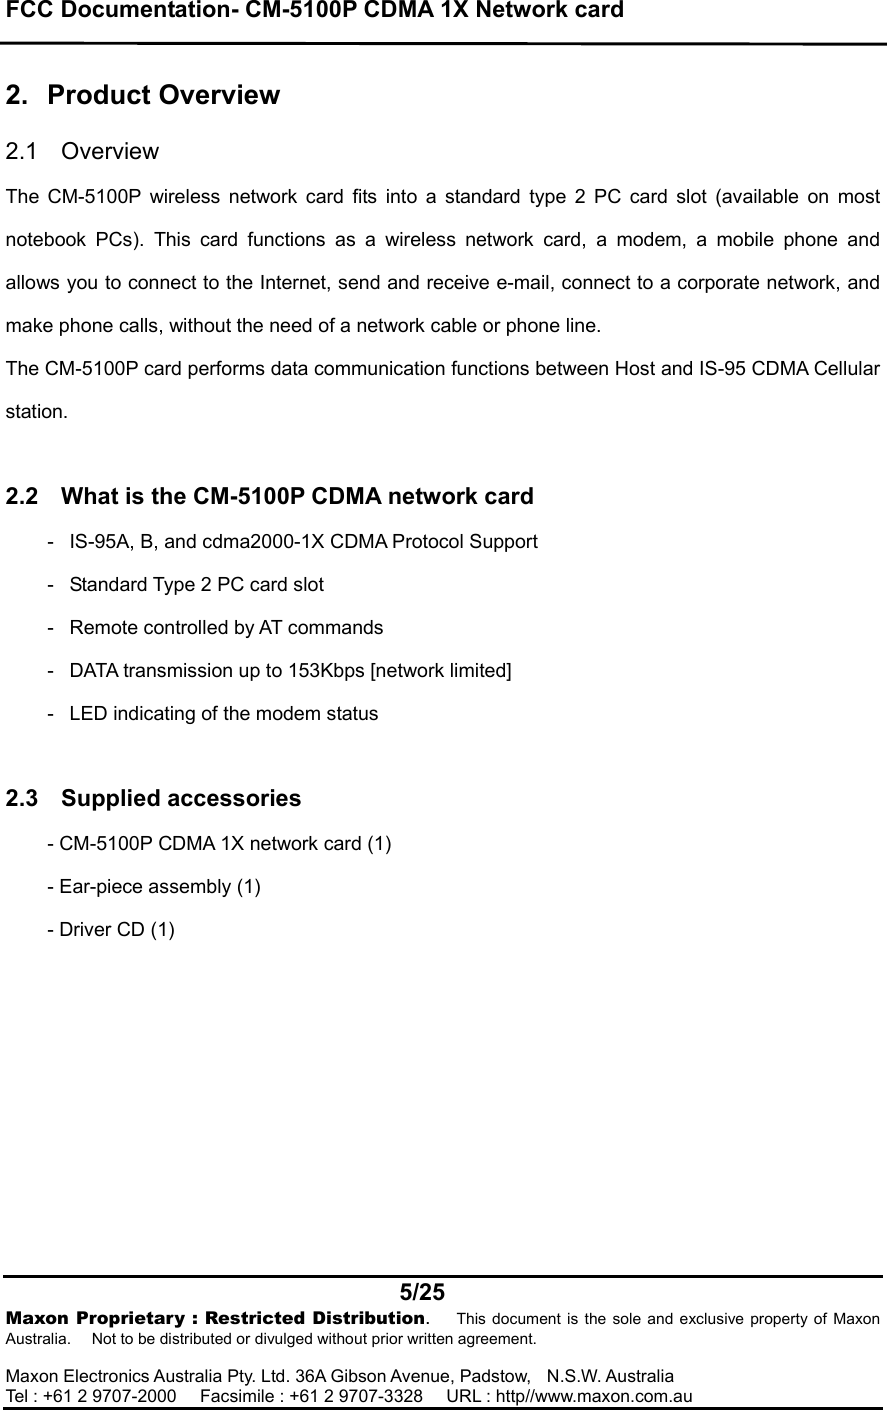 FCC Documentation- CM-5100P CDMA 1X Network card    5/25  Maxon Proprietary : Restricted Distribution.   This document is the sole and exclusive property of Maxon Australia.      Not to be distributed or divulged without prior written agreement.  Maxon Electronics Australia Pty. Ltd. 36A Gibson Avenue, Padstow,  N.S.W. Australia    Tel : +61 2 9707-2000      Facsimile : +61 2 9707-3328      URL : http//www.maxon.com.au  2. Product Overview  2.1 Overview  The CM-5100P wireless network card fits into a standard type 2 PC card slot (available on most notebook PCs). This card functions as a wireless network card, a modem, a mobile phone and allows you to connect to the Internet, send and receive e-mail, connect to a corporate network, and make phone calls, without the need of a network cable or phone line. The CM-5100P card performs data communication functions between Host and IS-95 CDMA Cellular station.   2.2  What is the CM-5100P CDMA network card -    IS-95A, B, and cdma2000-1X CDMA Protocol Support -    Standard Type 2 PC card slot -    Remote controlled by AT commands -    DATA transmission up to 153Kbps [network limited] -    LED indicating of the modem status  2.3 Supplied accessories - CM-5100P CDMA 1X network card (1) - Ear-piece assembly (1) - Driver CD (1)   